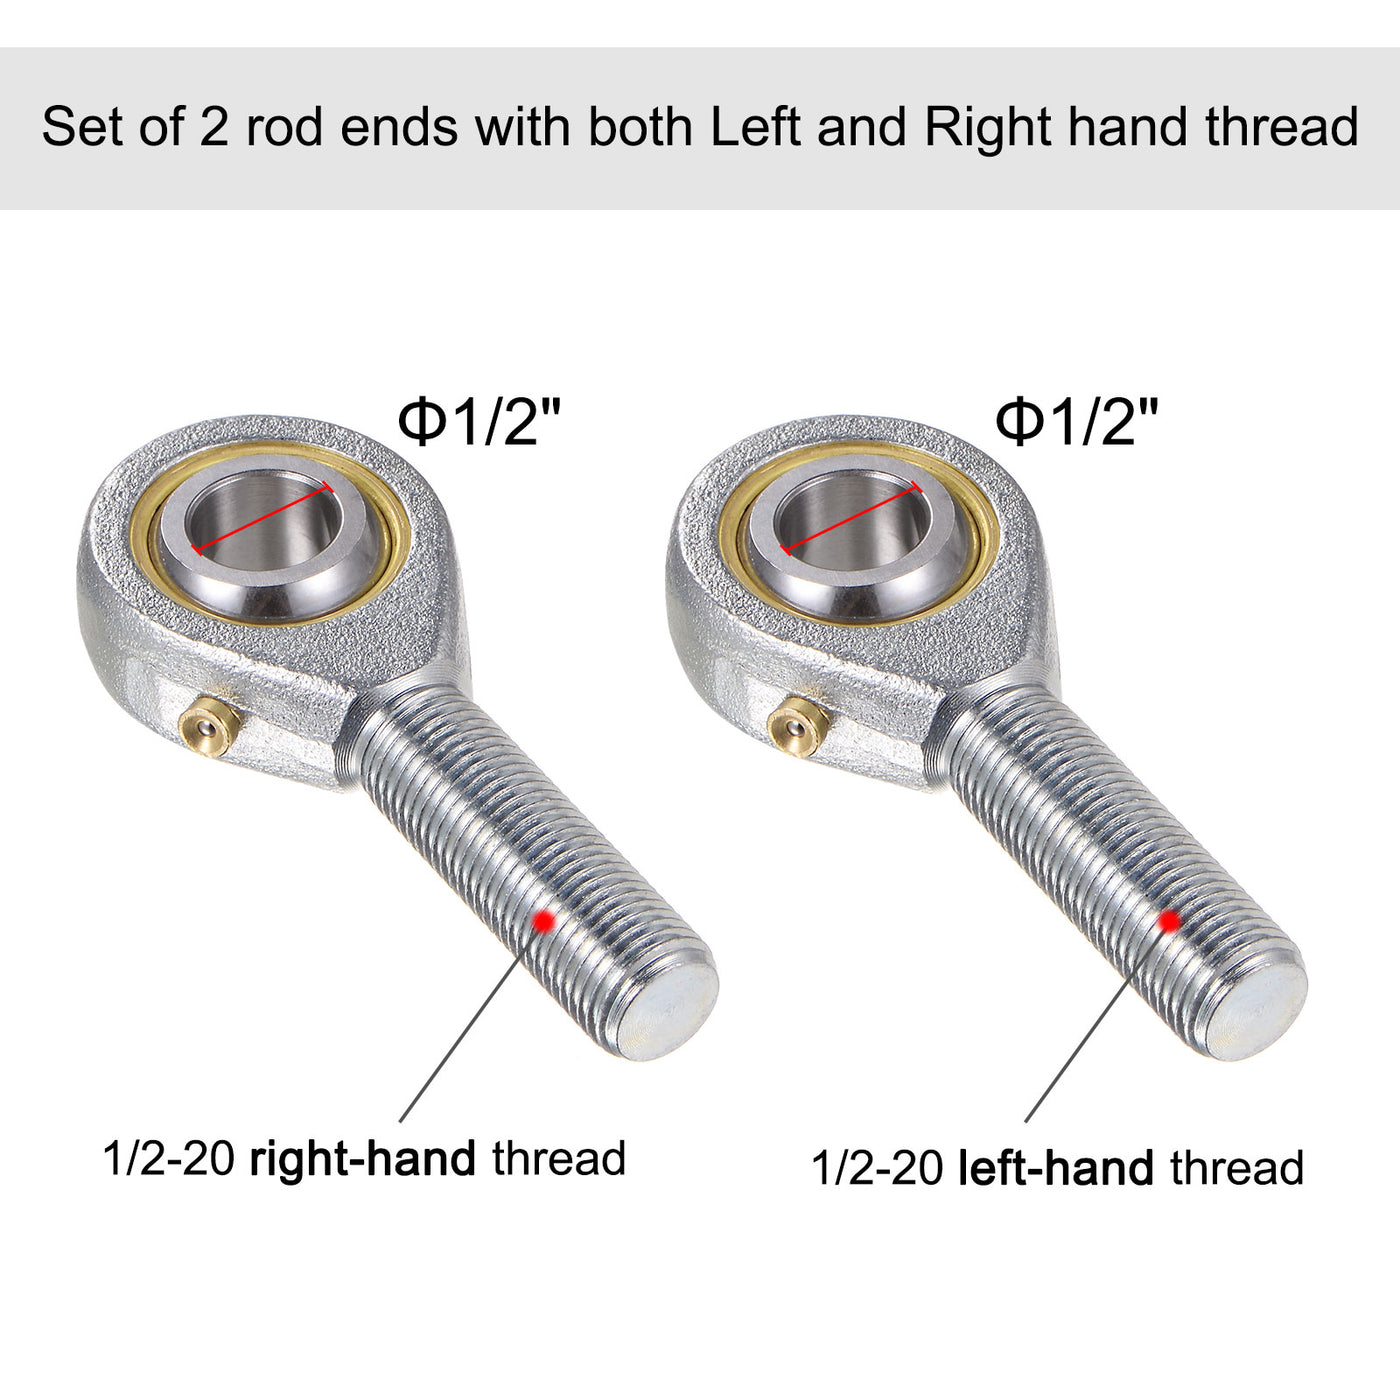 uxcell Uxcell POSB8 1/2" Male Rod End Set - 2pcs of 1/2-20 Left and Right Thread with Jam Nut